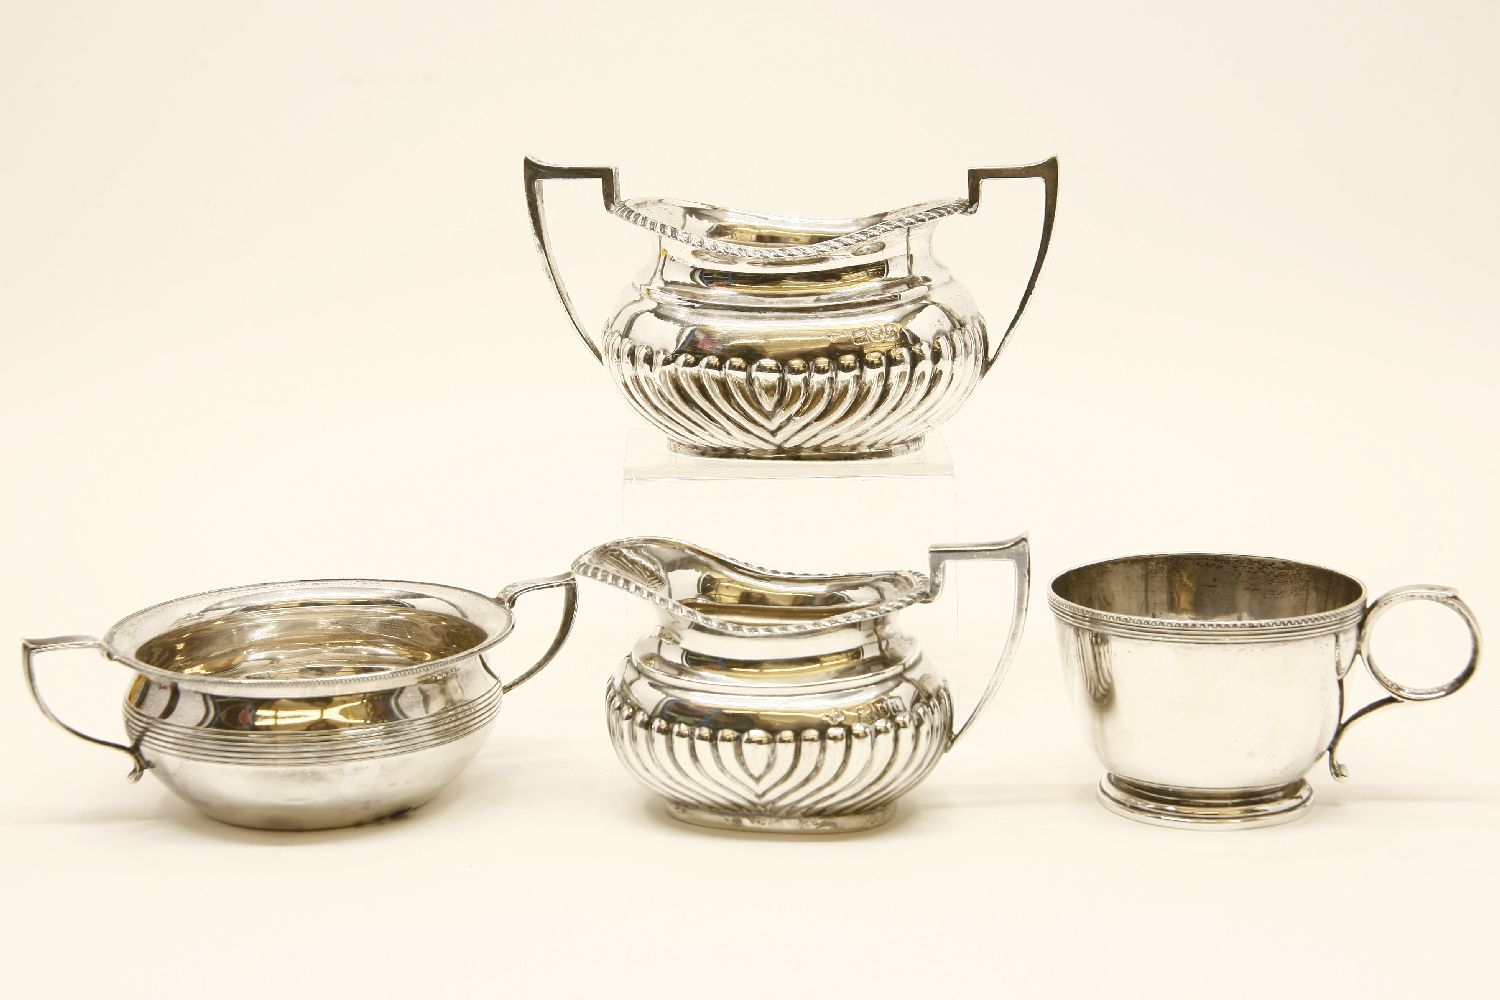 A 20th century silver cream jug with half gadrooned body, together with a matching sugar bowl, marks